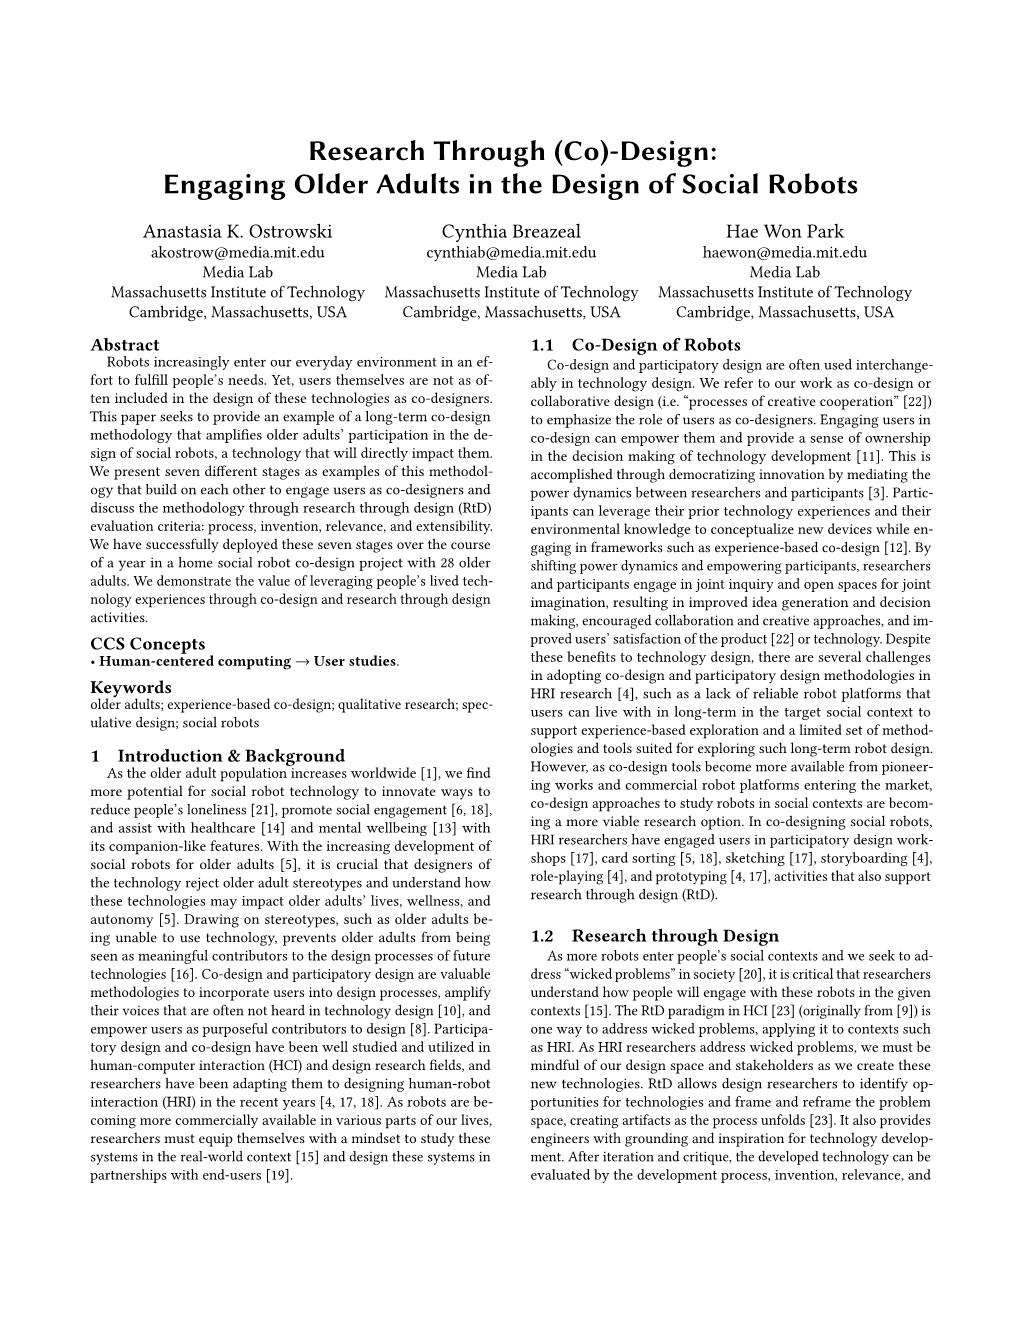 Engaging Older Adults in the Design of Social Robots